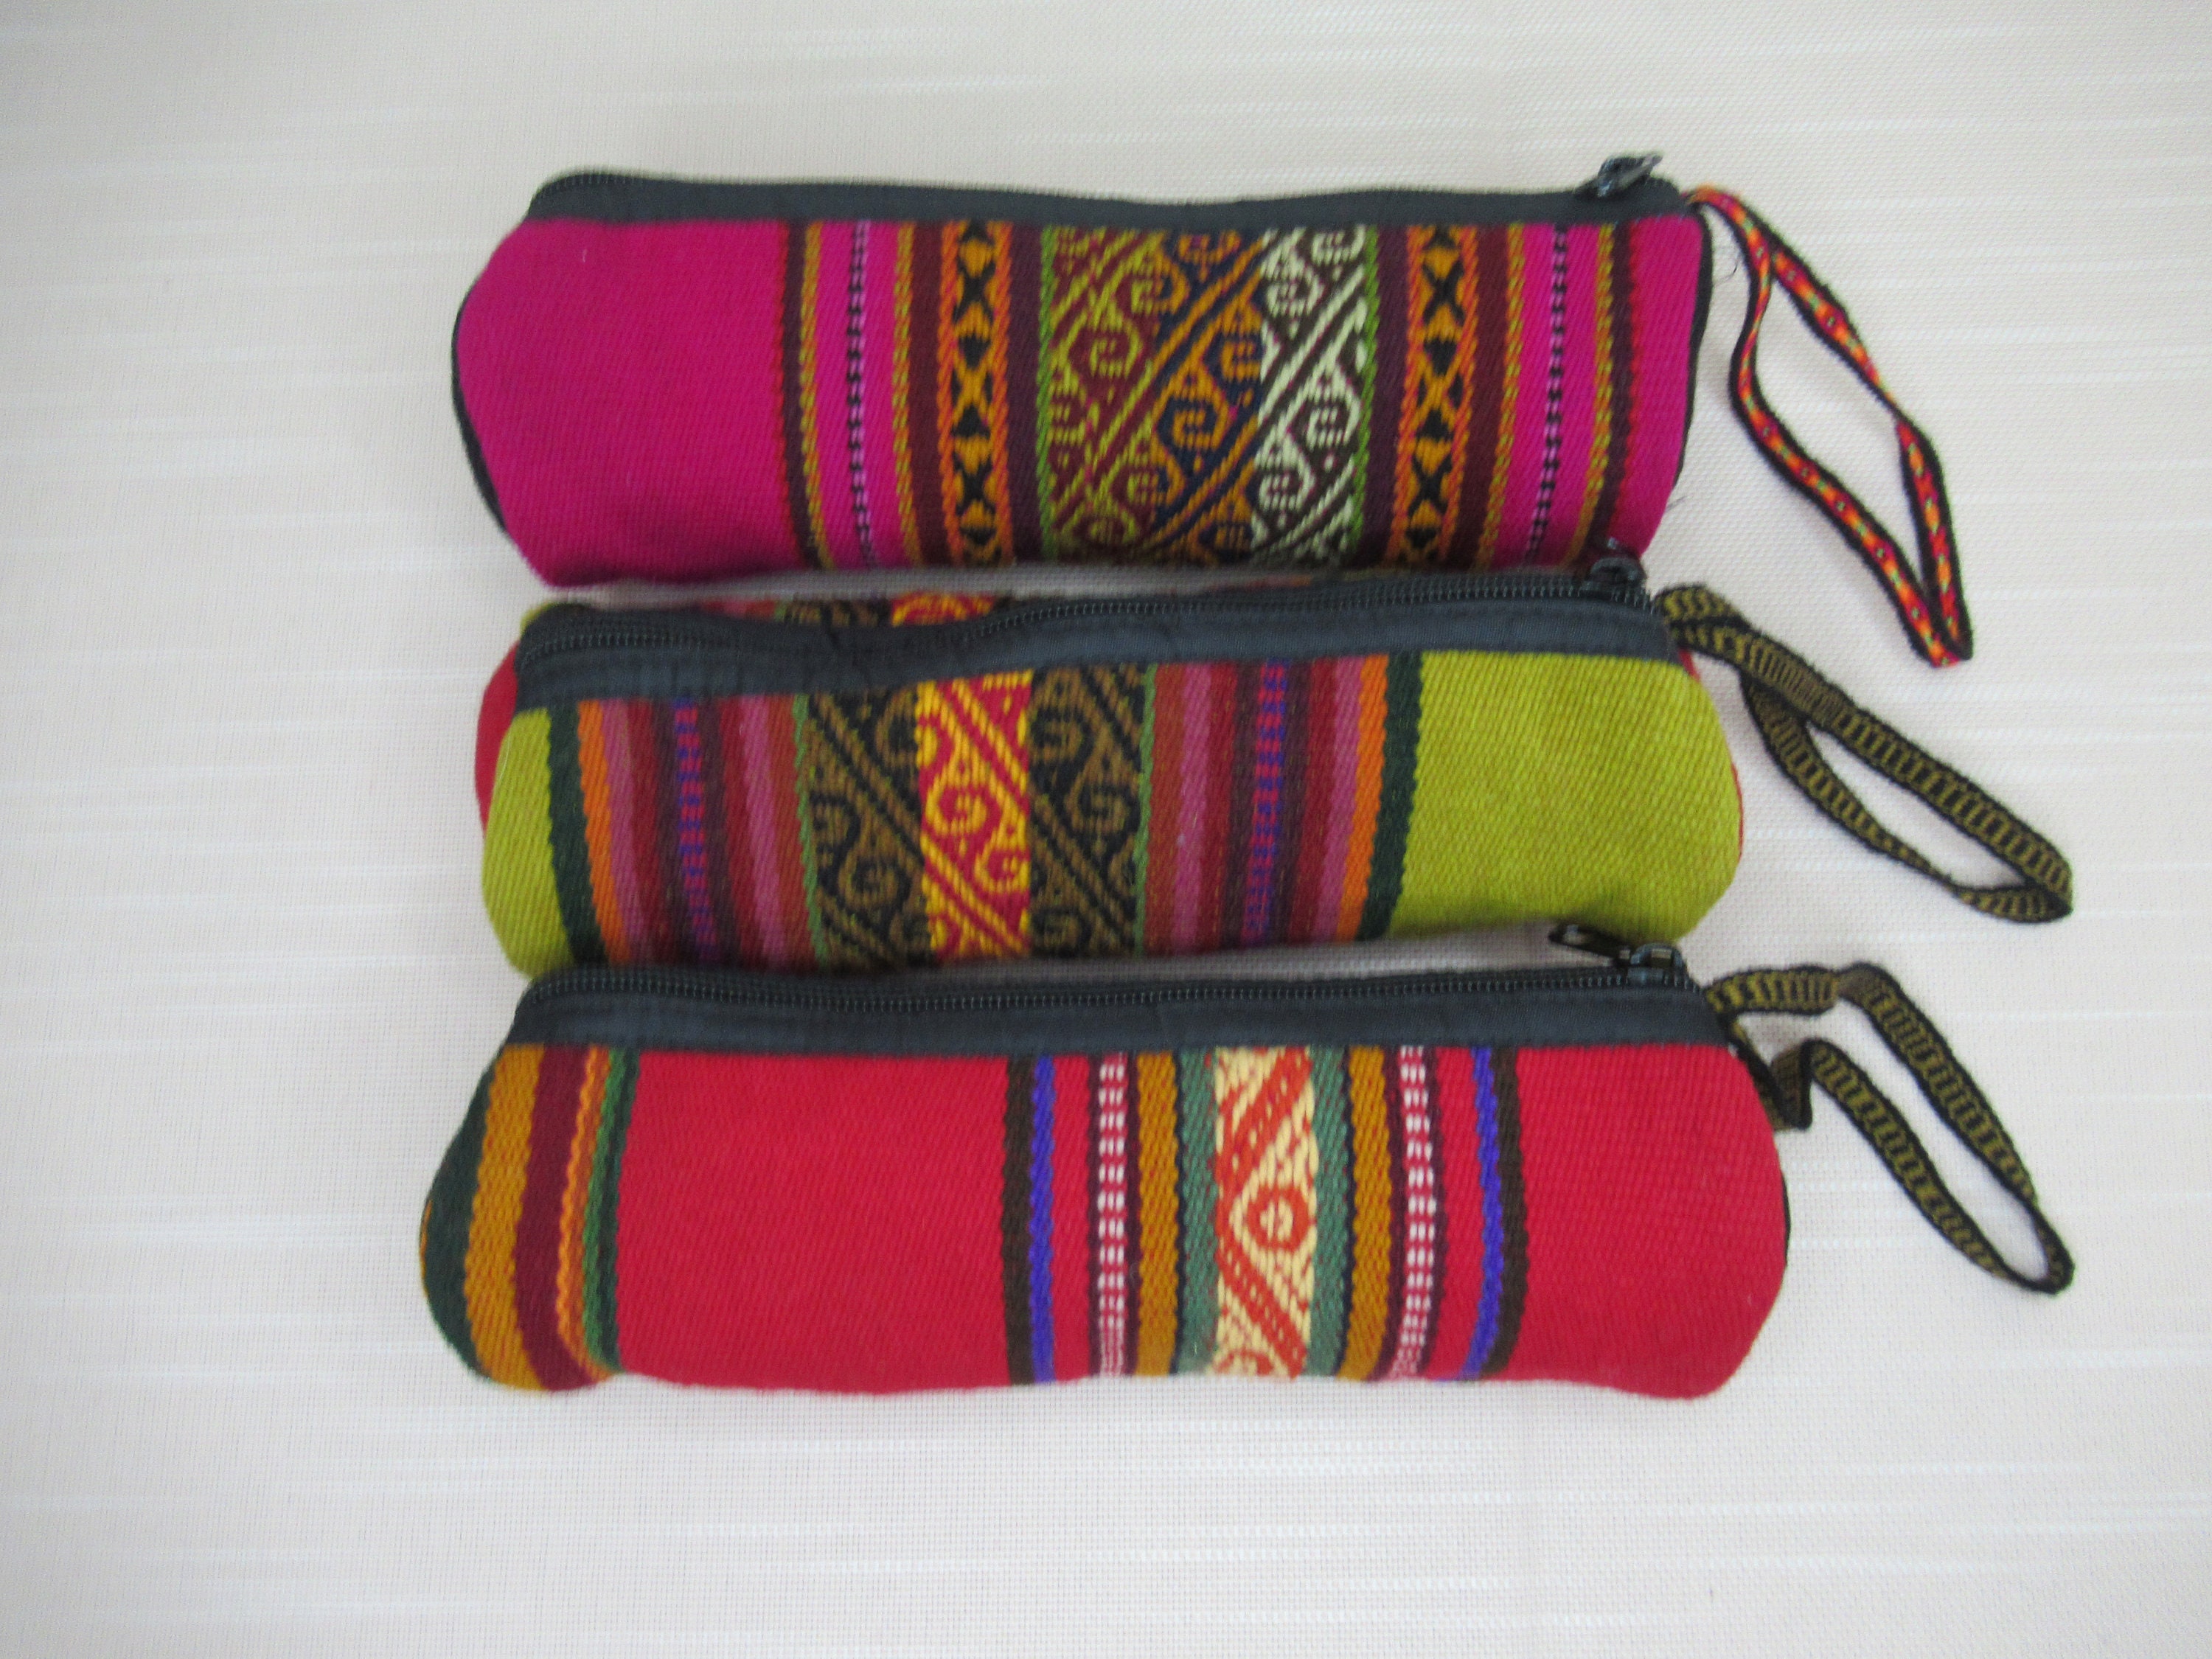 Ethnic Pencil Pouch, Multicolor Handmade Zipper Pouch, Boho Style, Back to  School Office Supply Pencil Case, Peruvian Fabric, Special Gift 